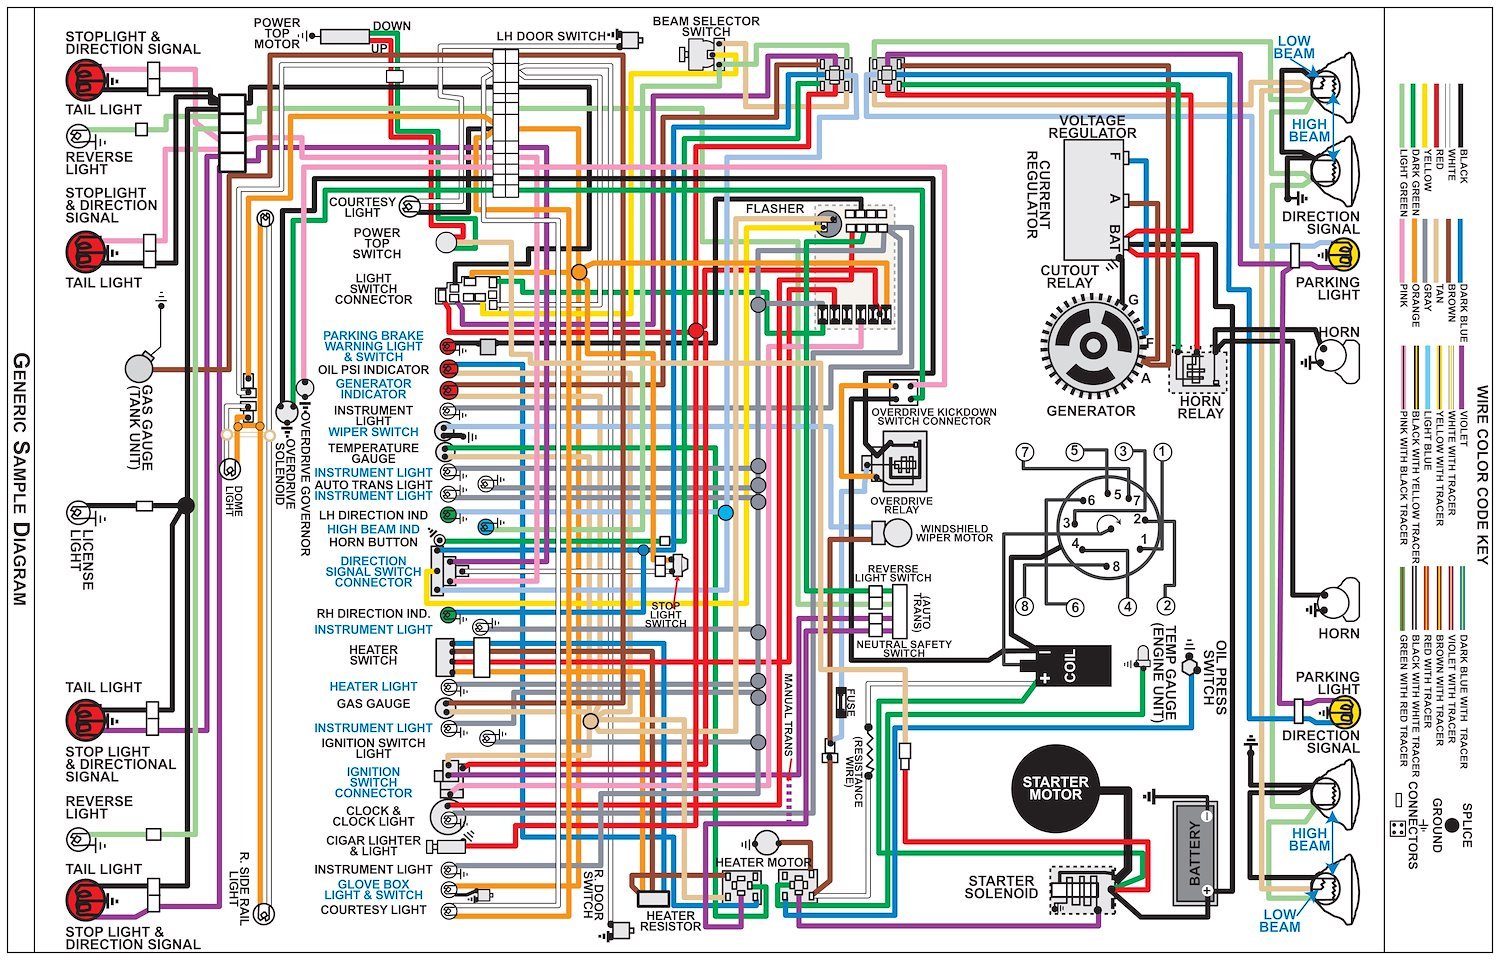 Wiring Diagram for 1965 Chevy Chevelle, El Camino,